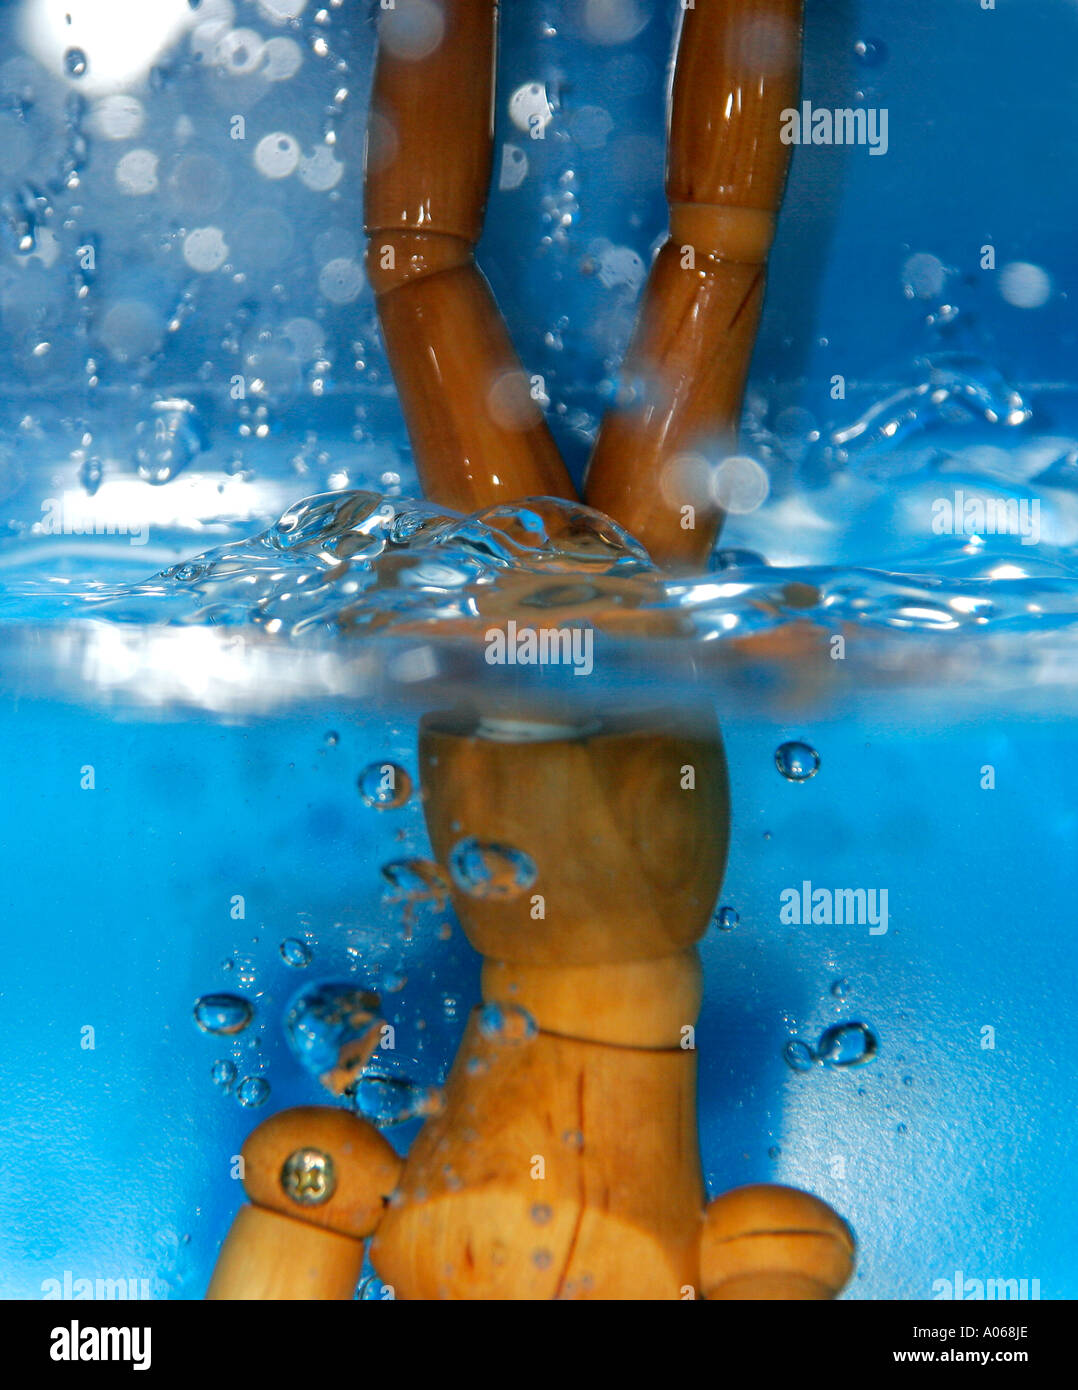 A wooden artifact immersed in water Stock Photo